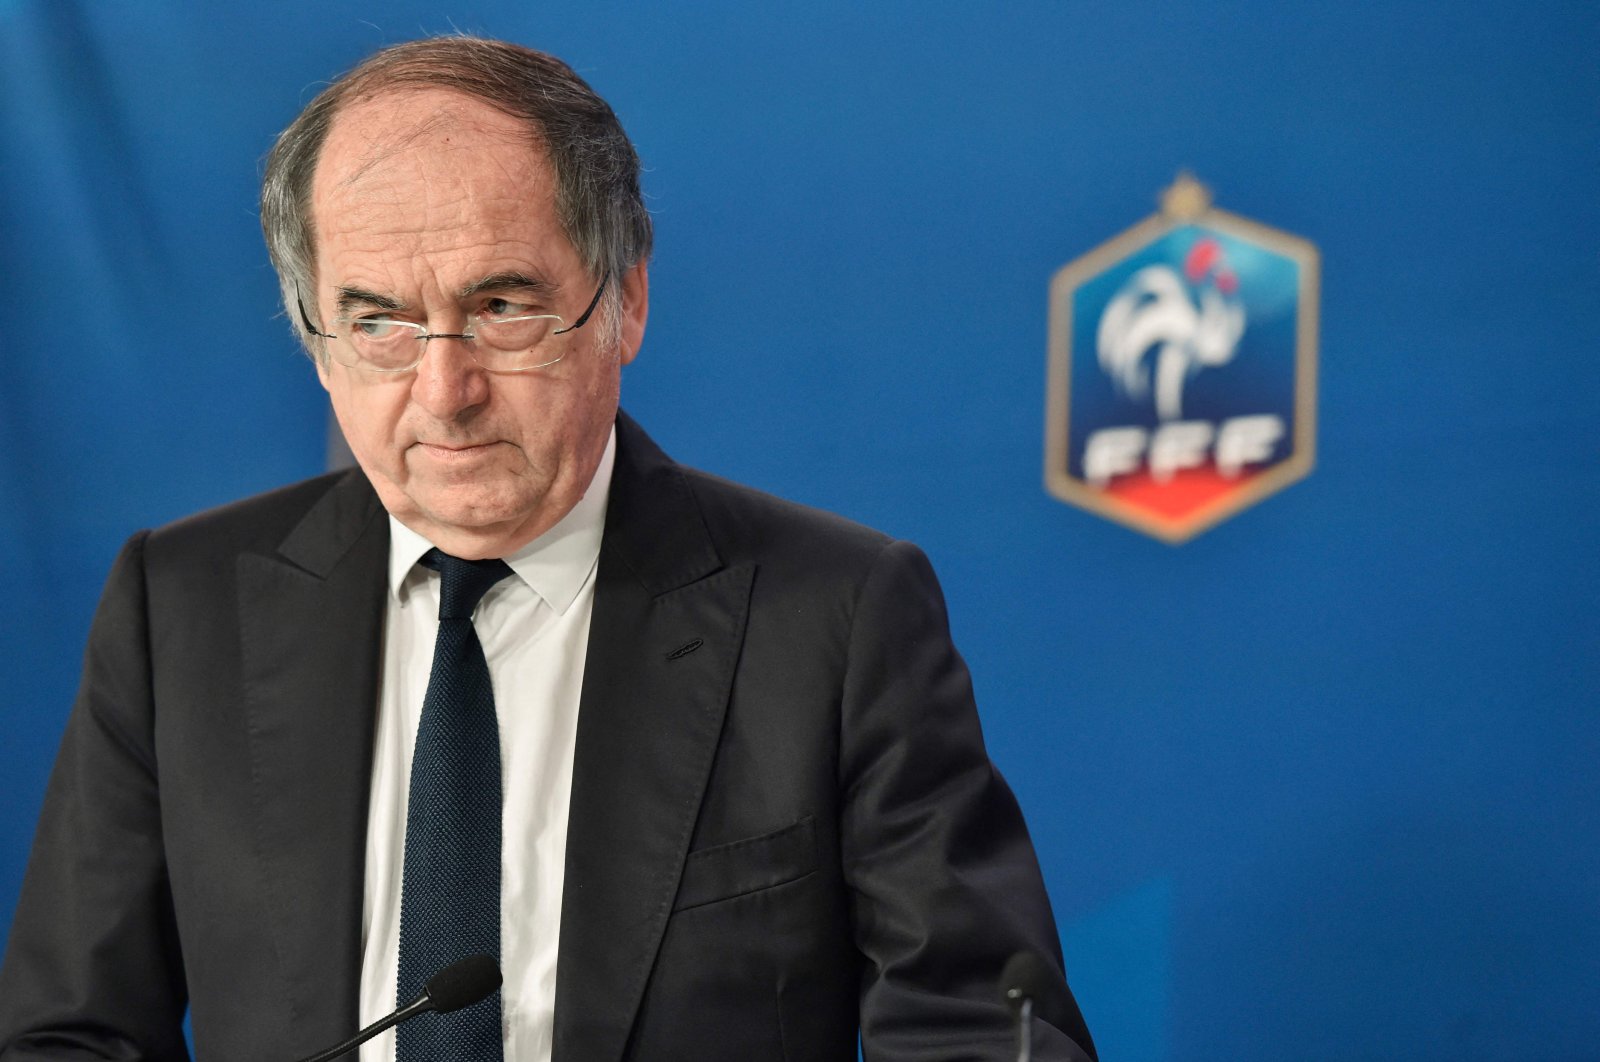 File photo of French Football Federation (FFF) President Noel Le Graet giving a press statement on the Euro 2016 football tournament, Paris, France, July 12, 2016. (AFP Photo)